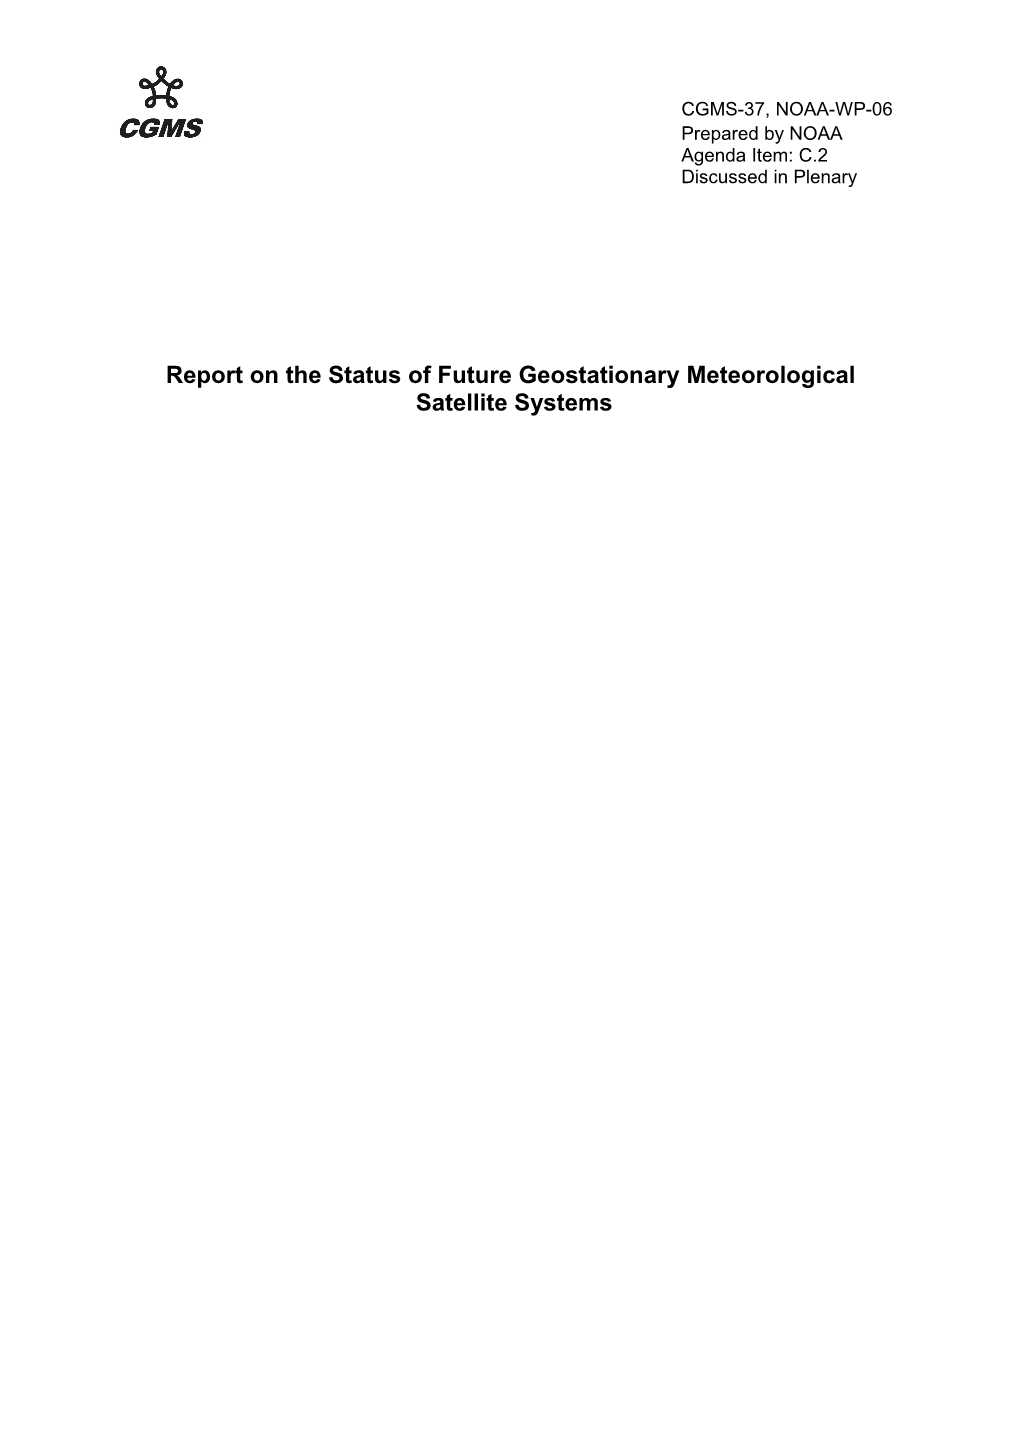 Report on the Status of Future Geostationary Meteorological